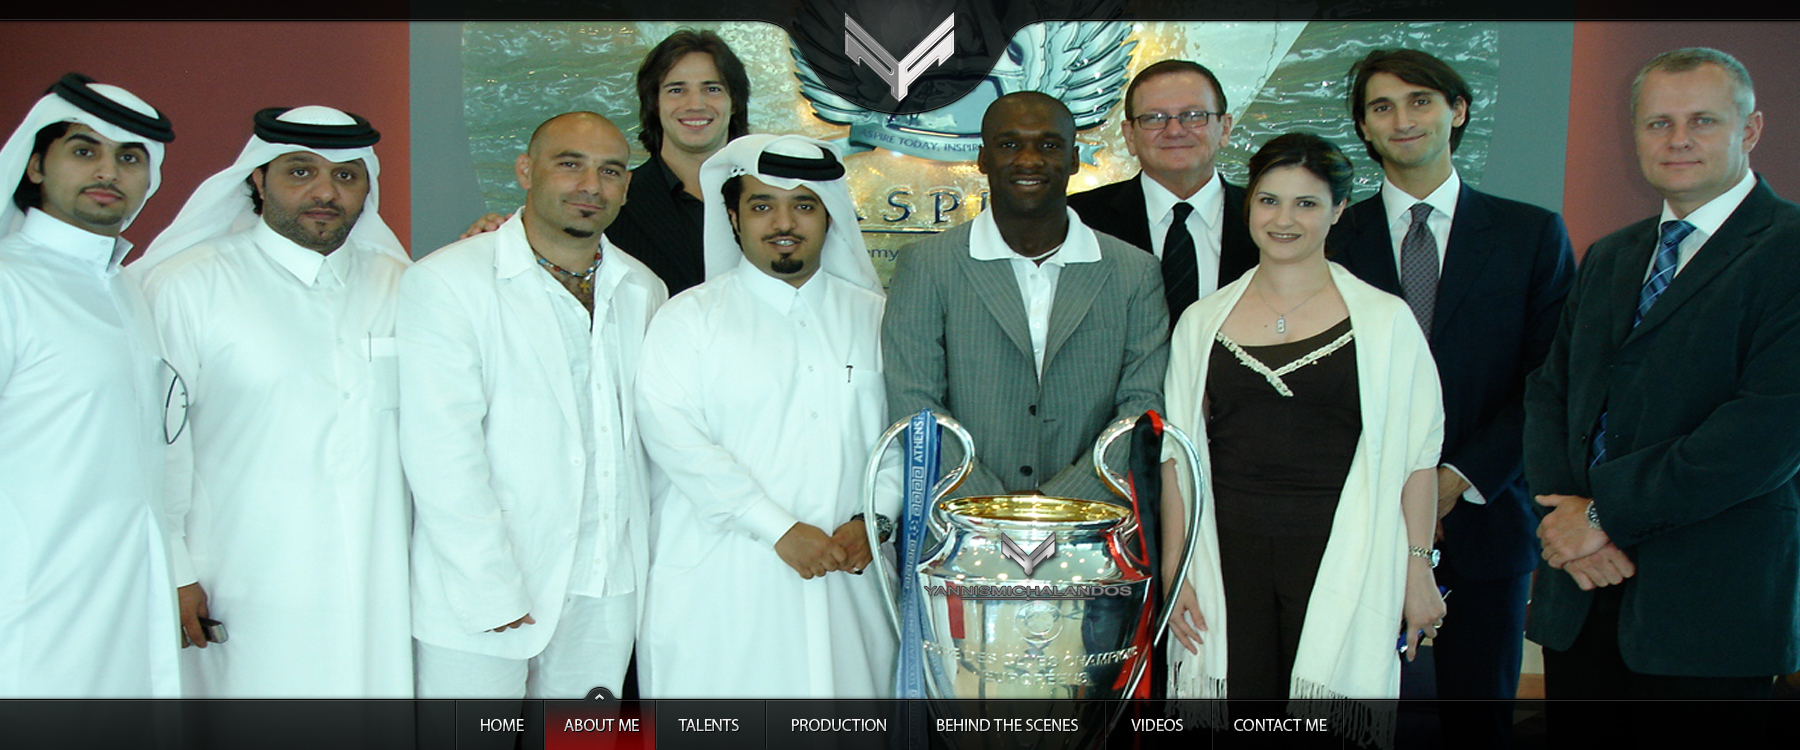 Yannis, Saad Al-Kharji, Geoffrey Schuhkraft & Clarence Seedorf with the 2007 Champions League Trophy at the Aspire Sports Academy in Doha.